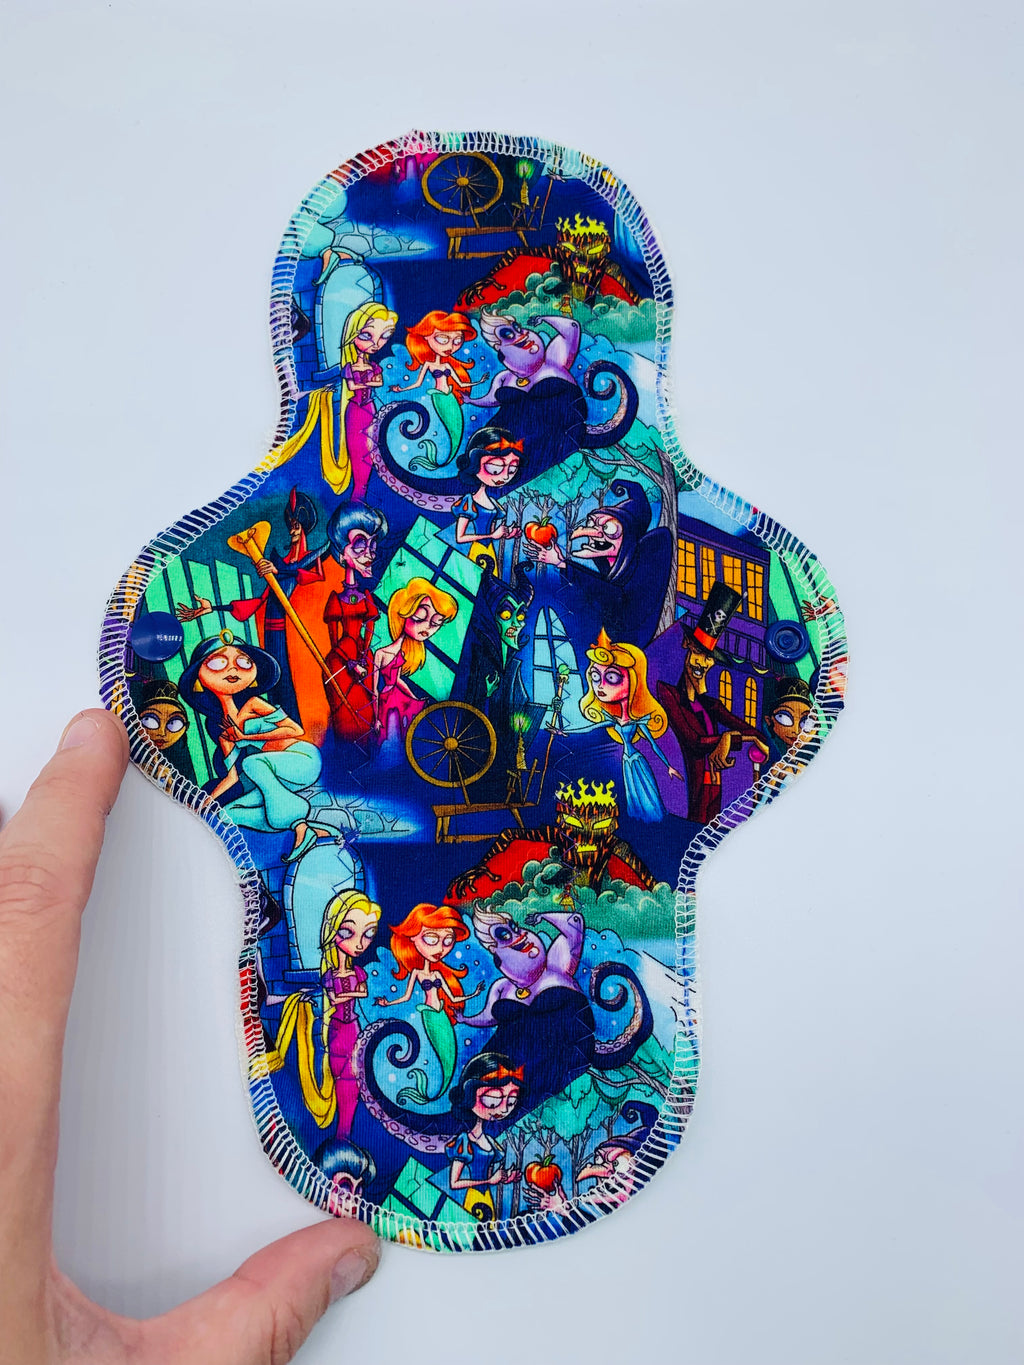 10” moderate flow PUL cloth reusable pads “dark fairy tales”